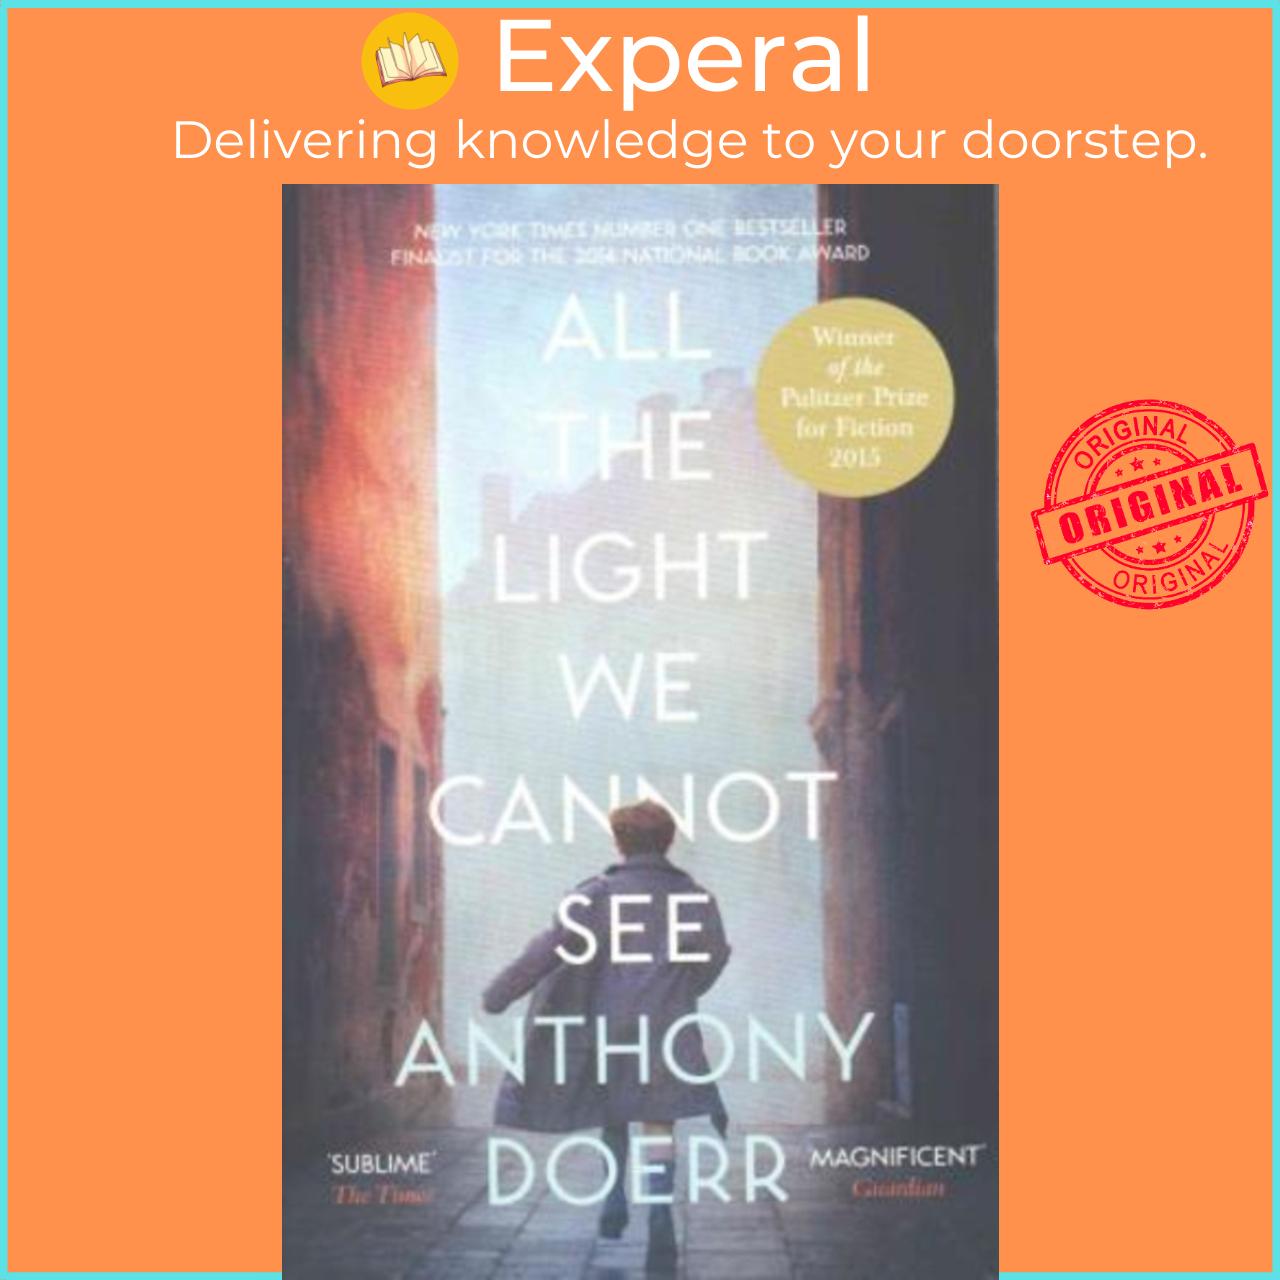 Sách - All the Light We Cannot See by Anthony Doerr (UK edition, paperback)